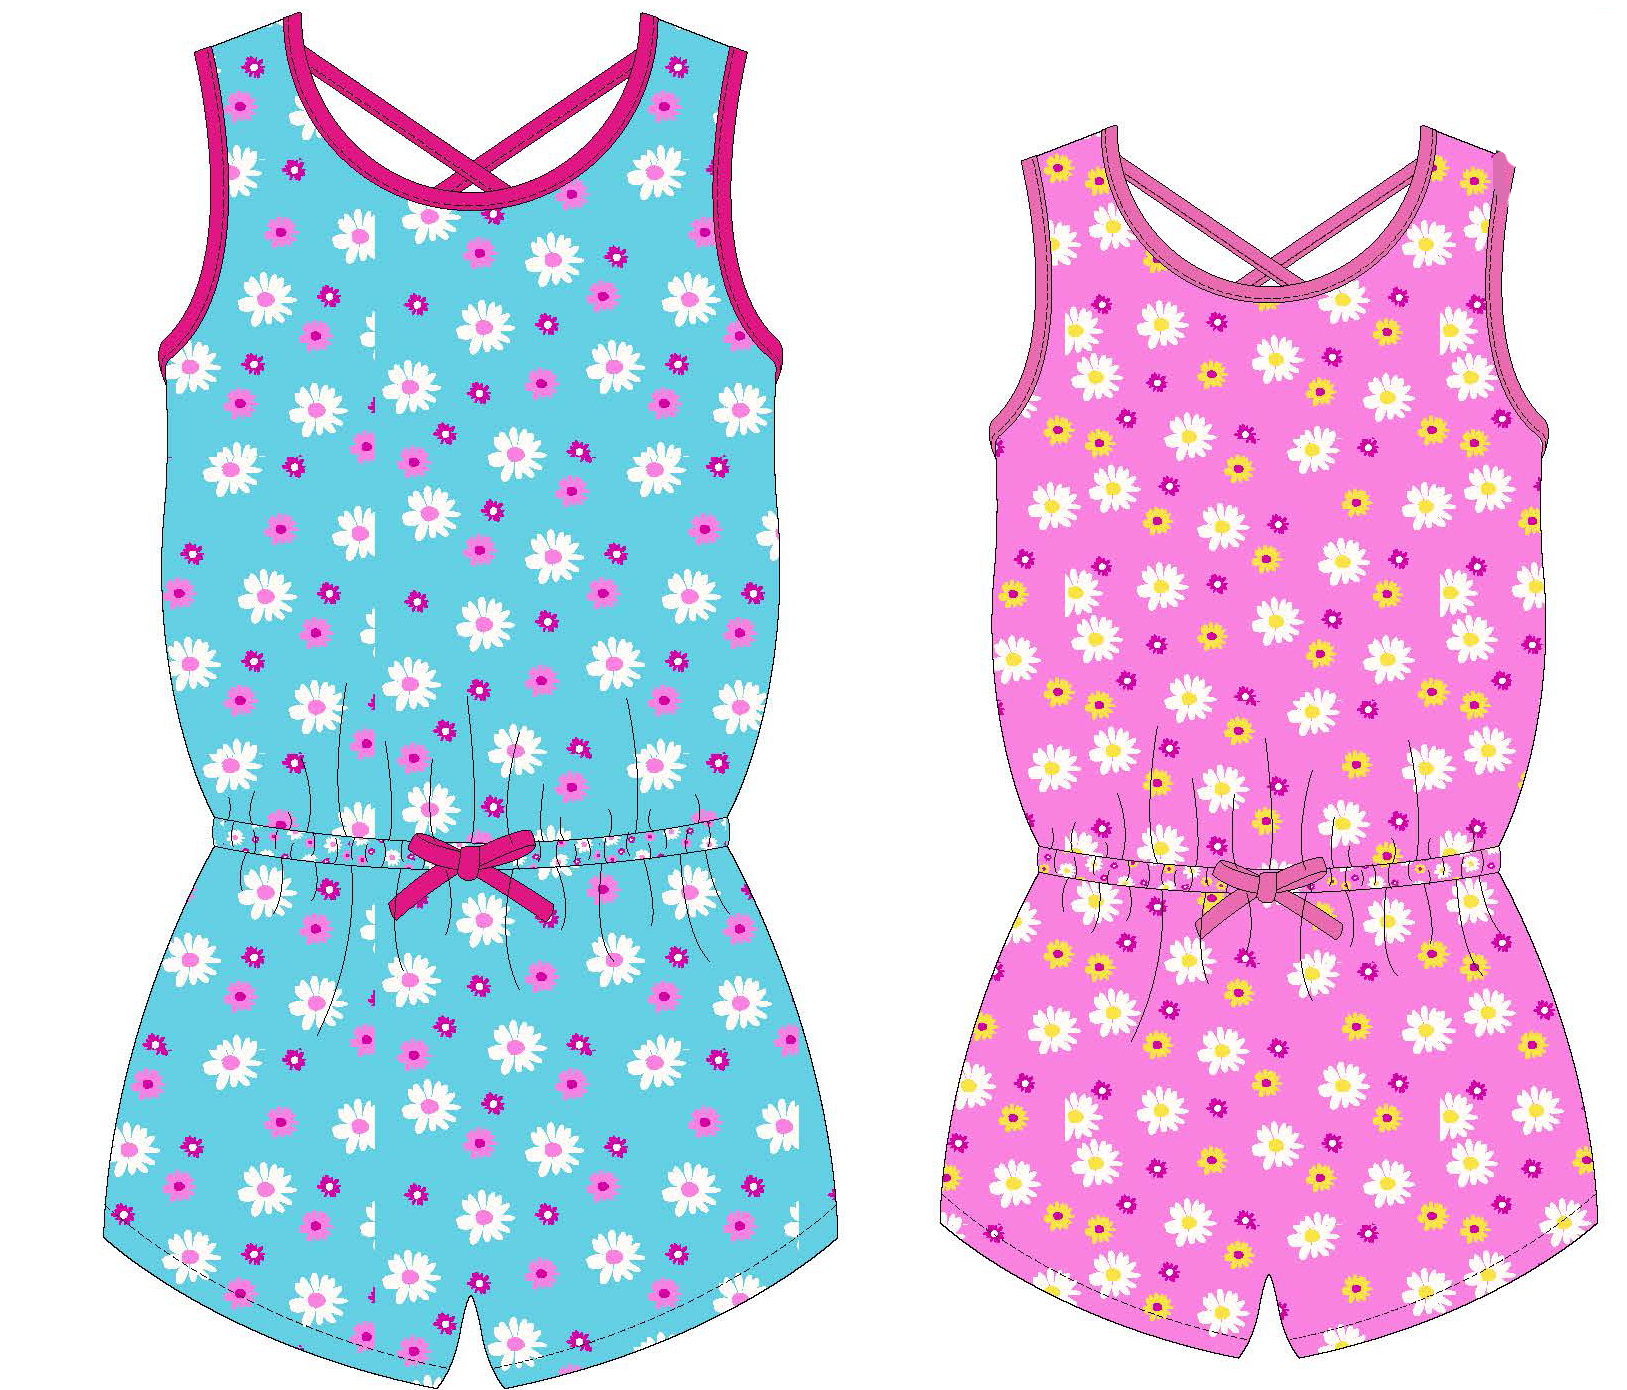 Toddler Girl's Printed Knit Romper DRESS w/ Spring Daisy & Floral Print - Size 2T-4T